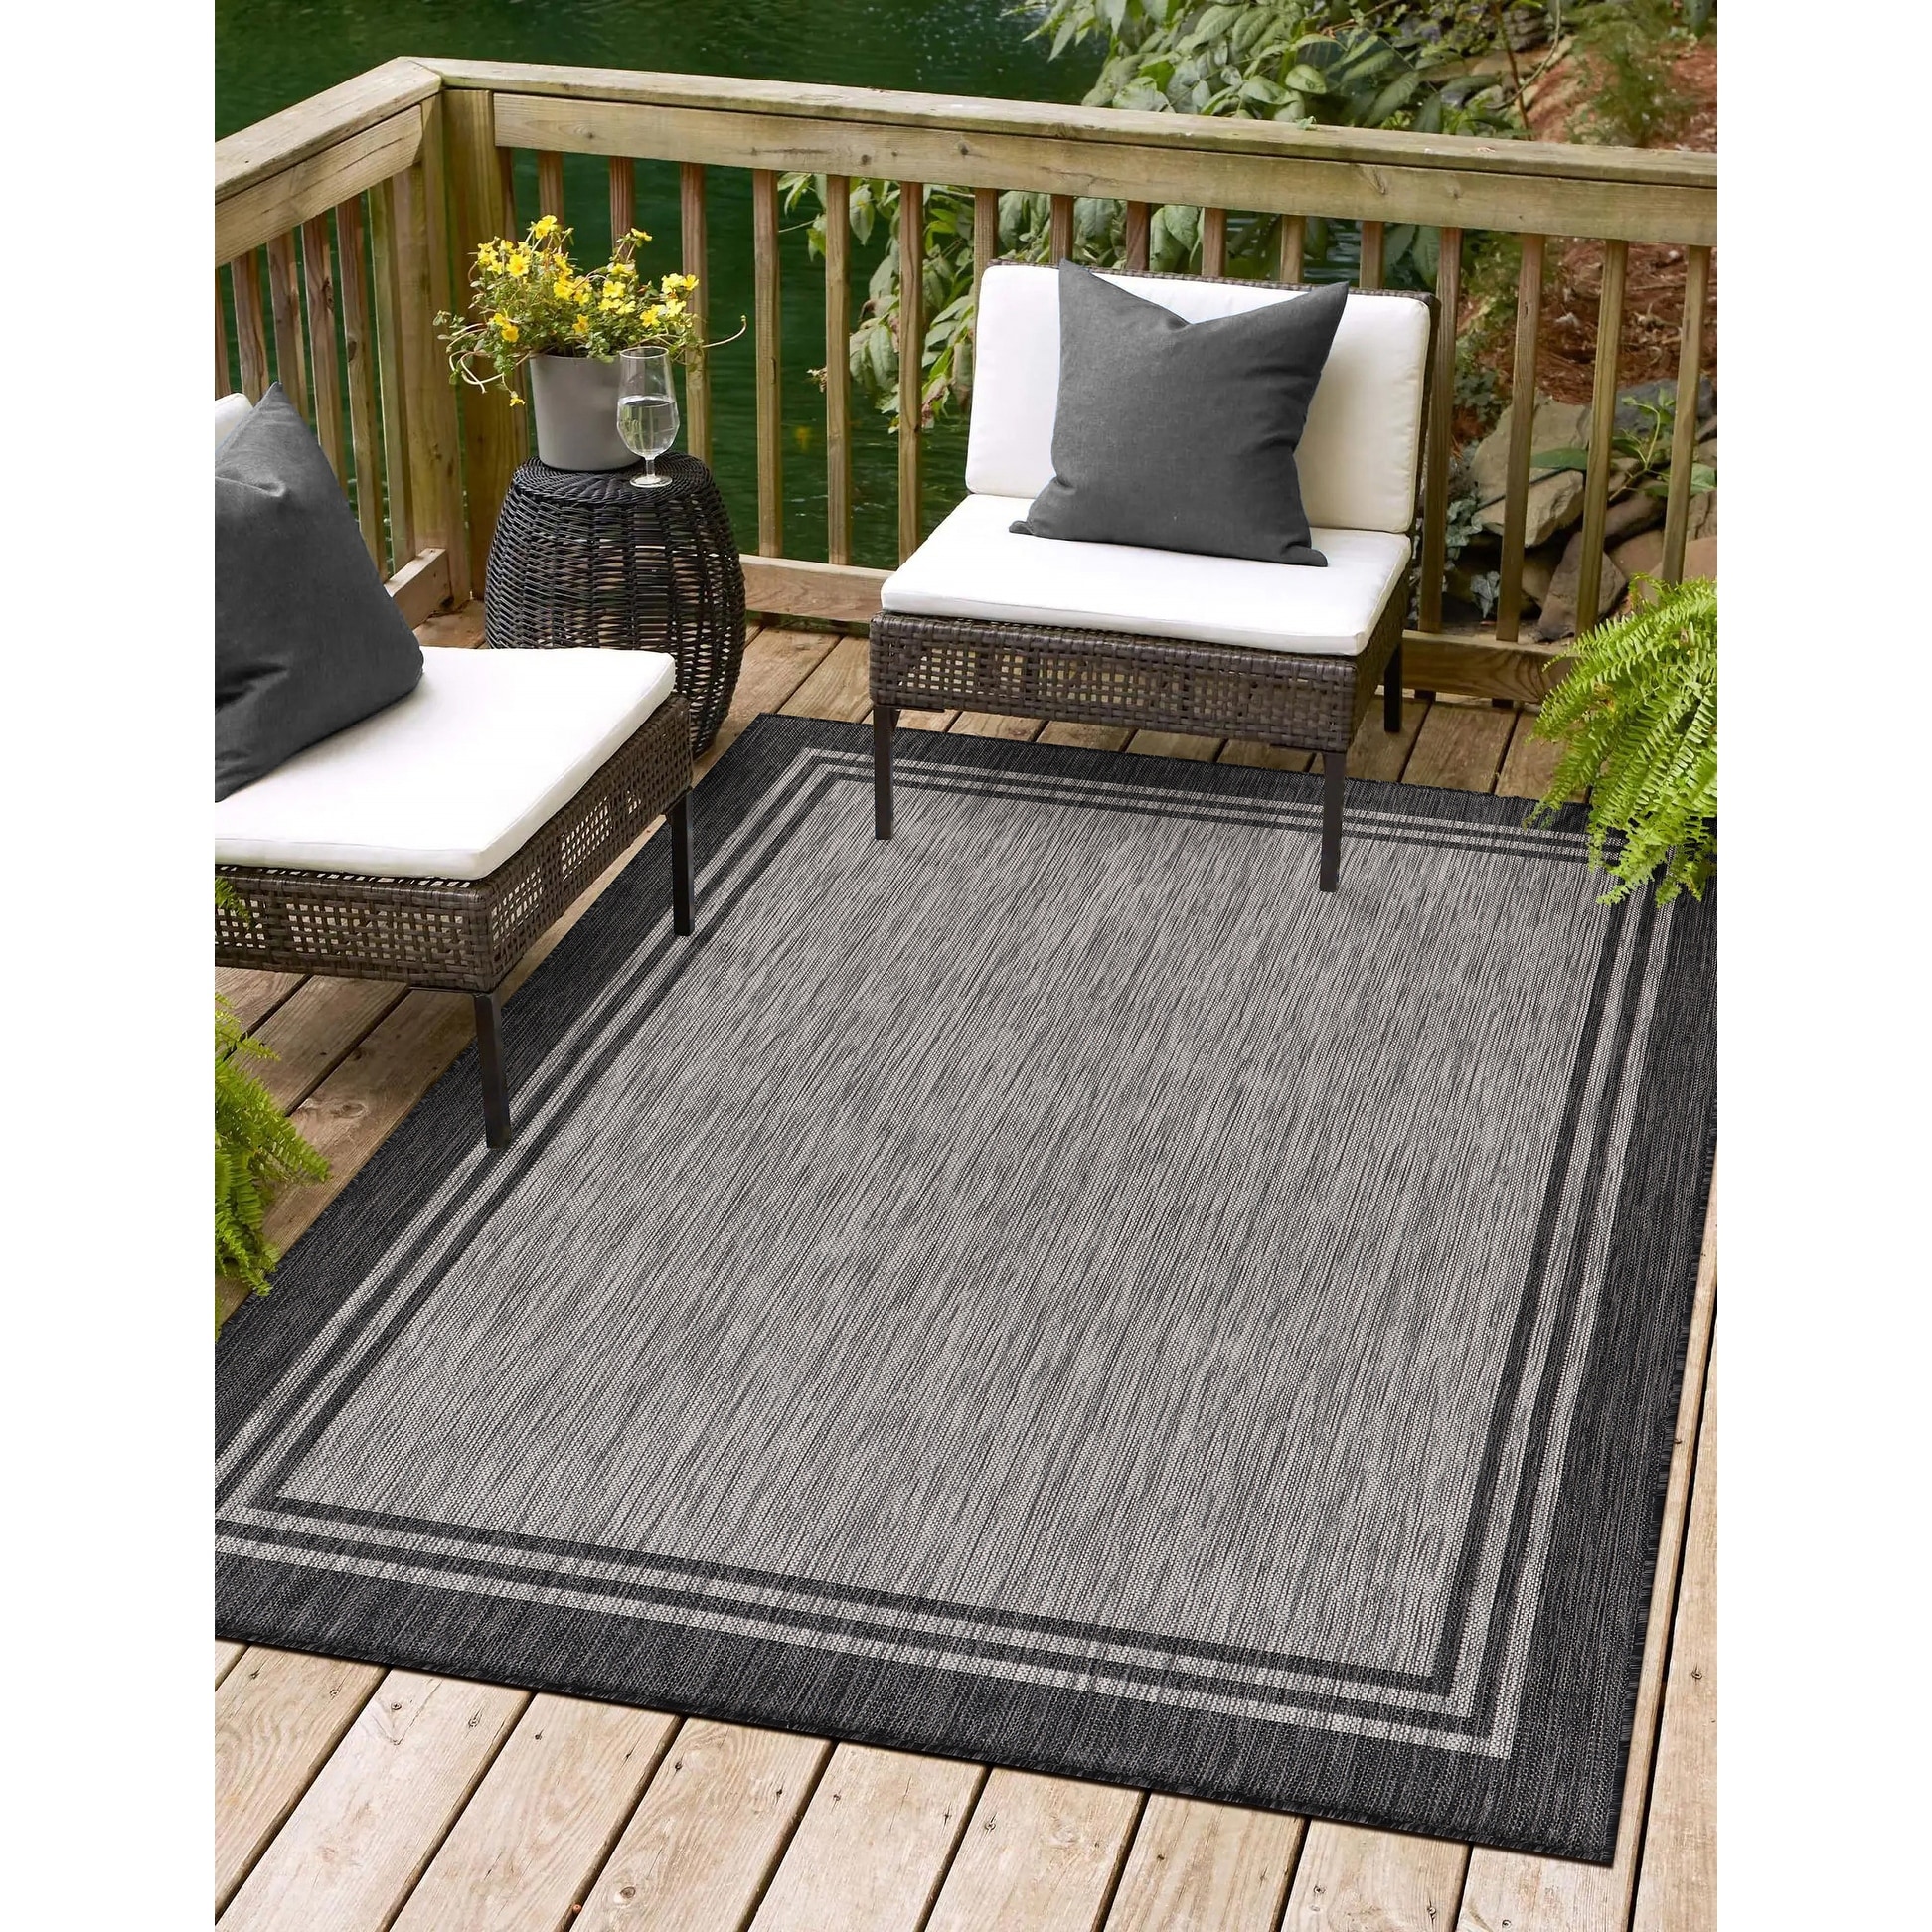 https://ak1.ostkcdn.com/images/products/is/images/direct/df7db19893567d088c3044f170c7e6bc022af3b3/Washable-Bordered-Indoor-Outdoor-Rug%2C-Outside-Carpet-for-Patio%2C-Deck%2C-Porch.jpg